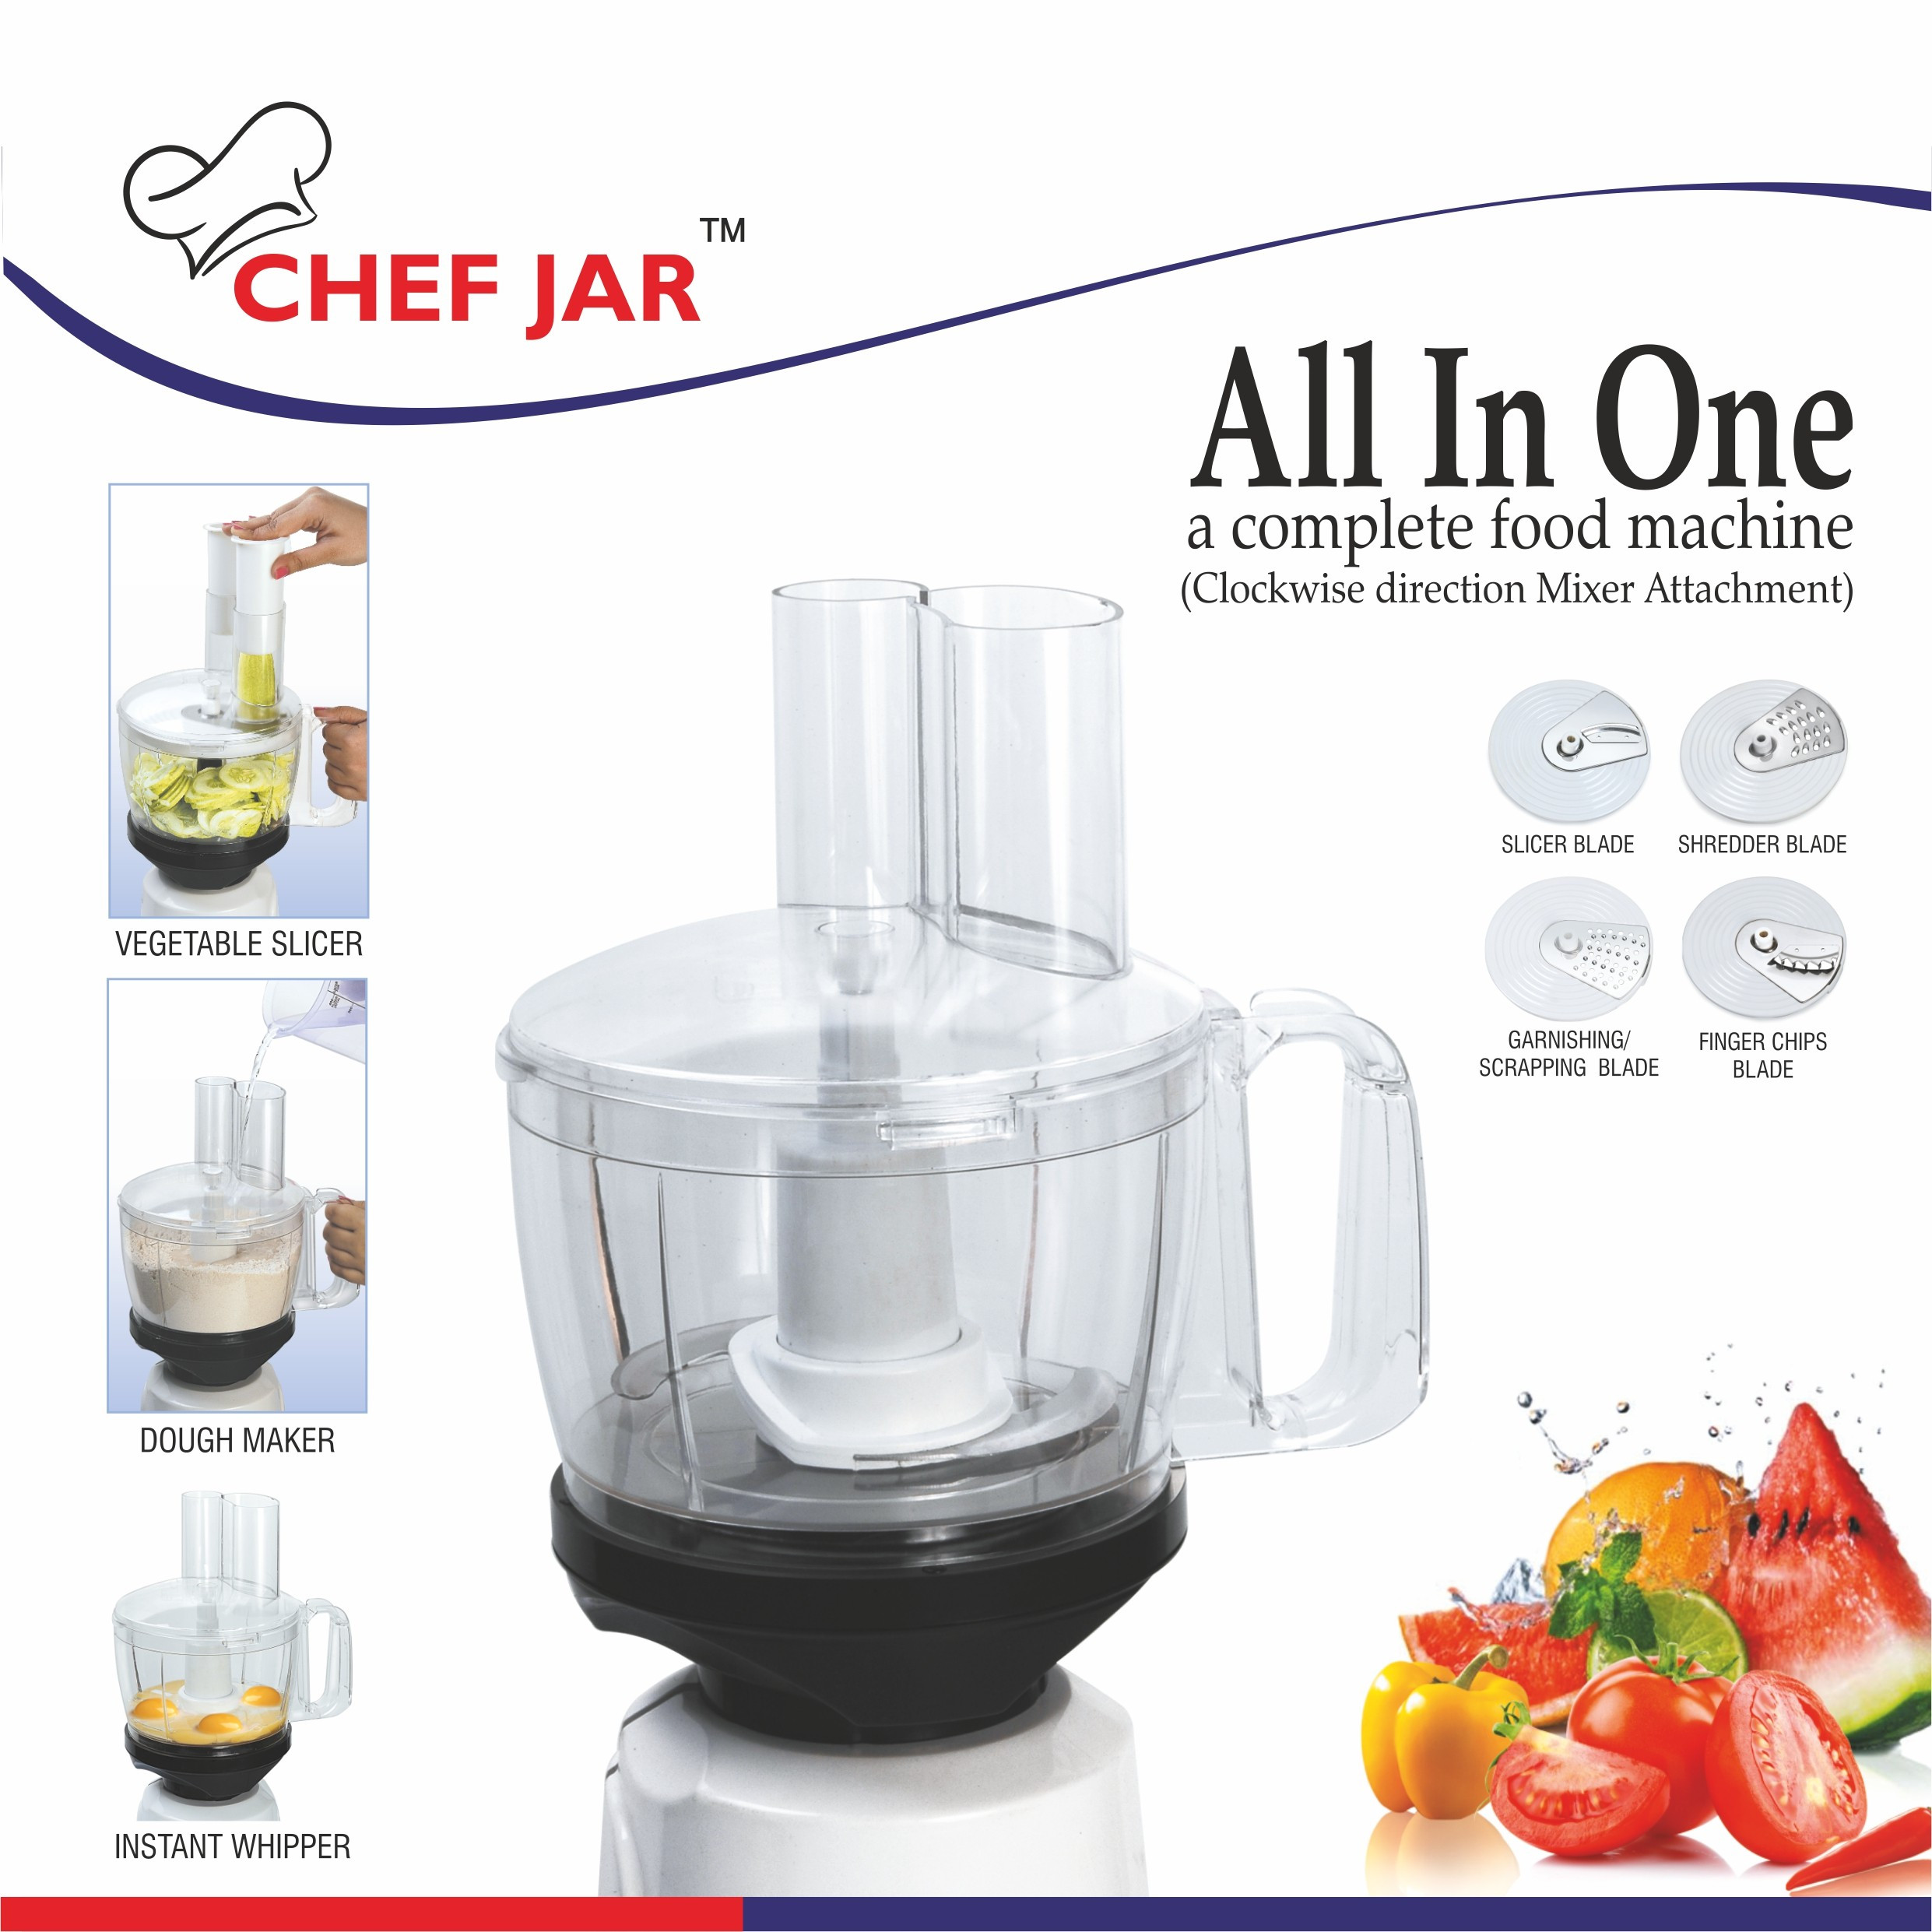 bajaj-classic-pro-600w-indian-mixer-grinder-with-special-chef-jar-stainless-steel-jars-indian-mixer-grinder-spice-coffee-grinder-110v-for-use-in-canada-usa9